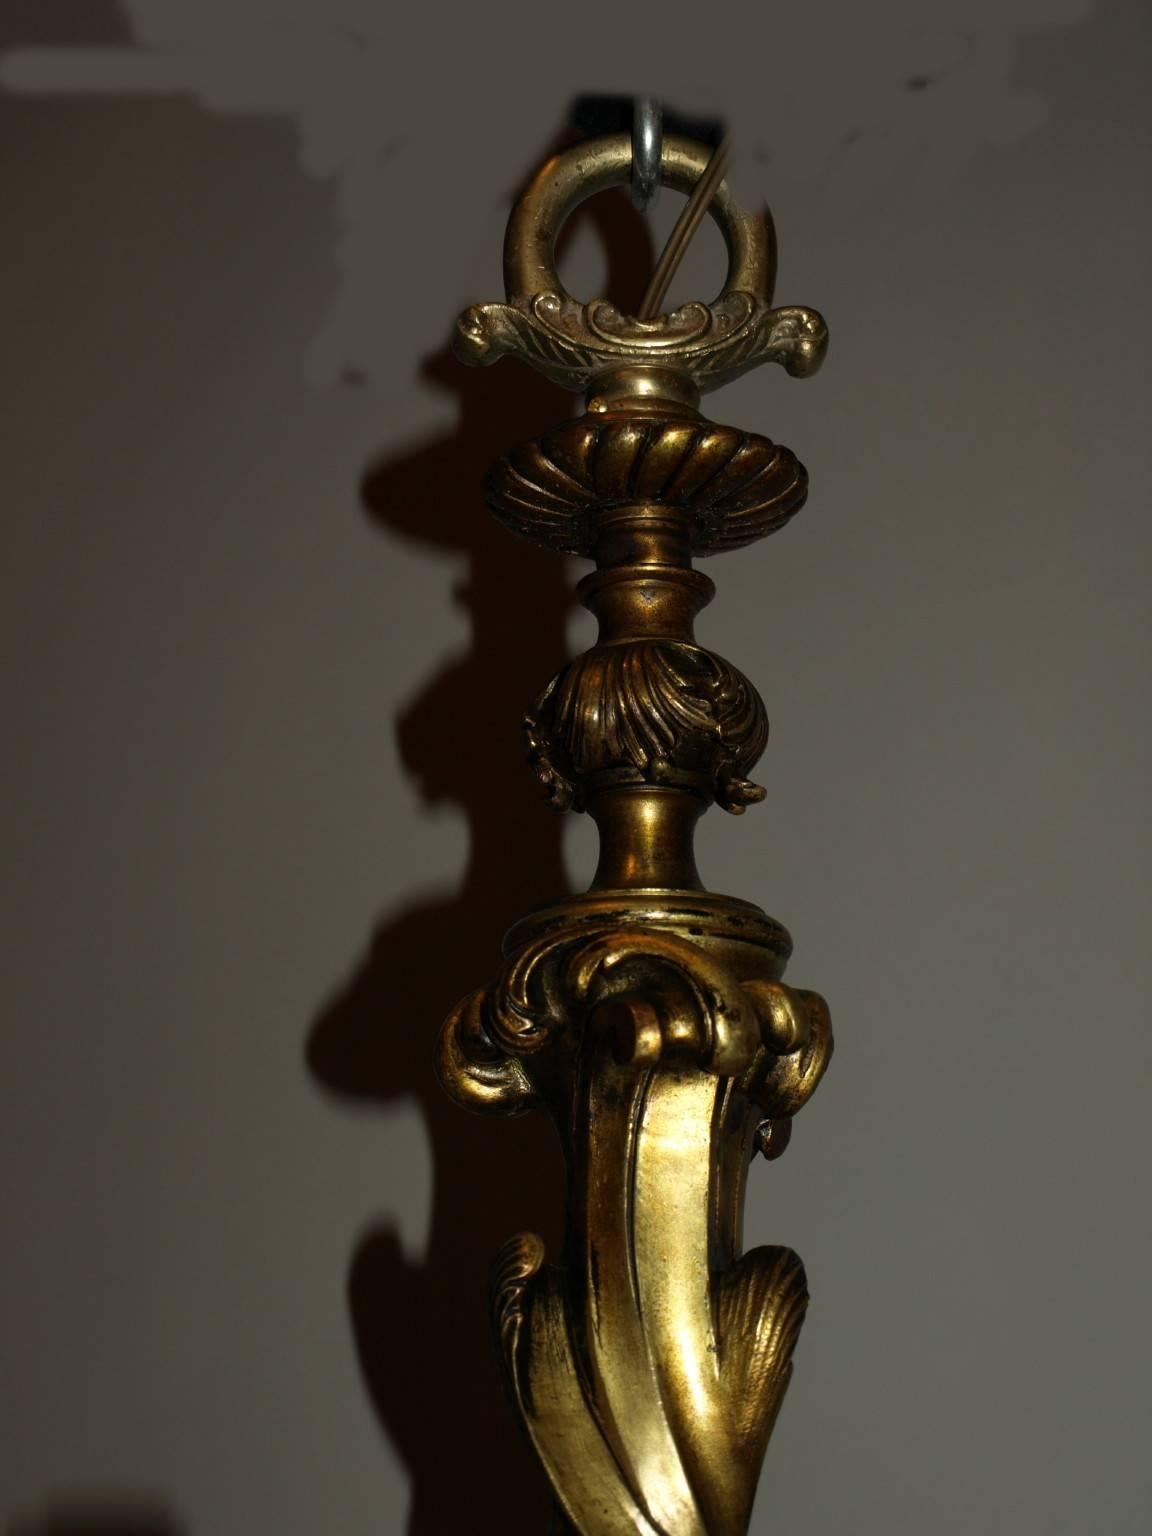 Exquisite gilt bronze ten-light Louis XV style chandelier, originally for candles, now electrified.